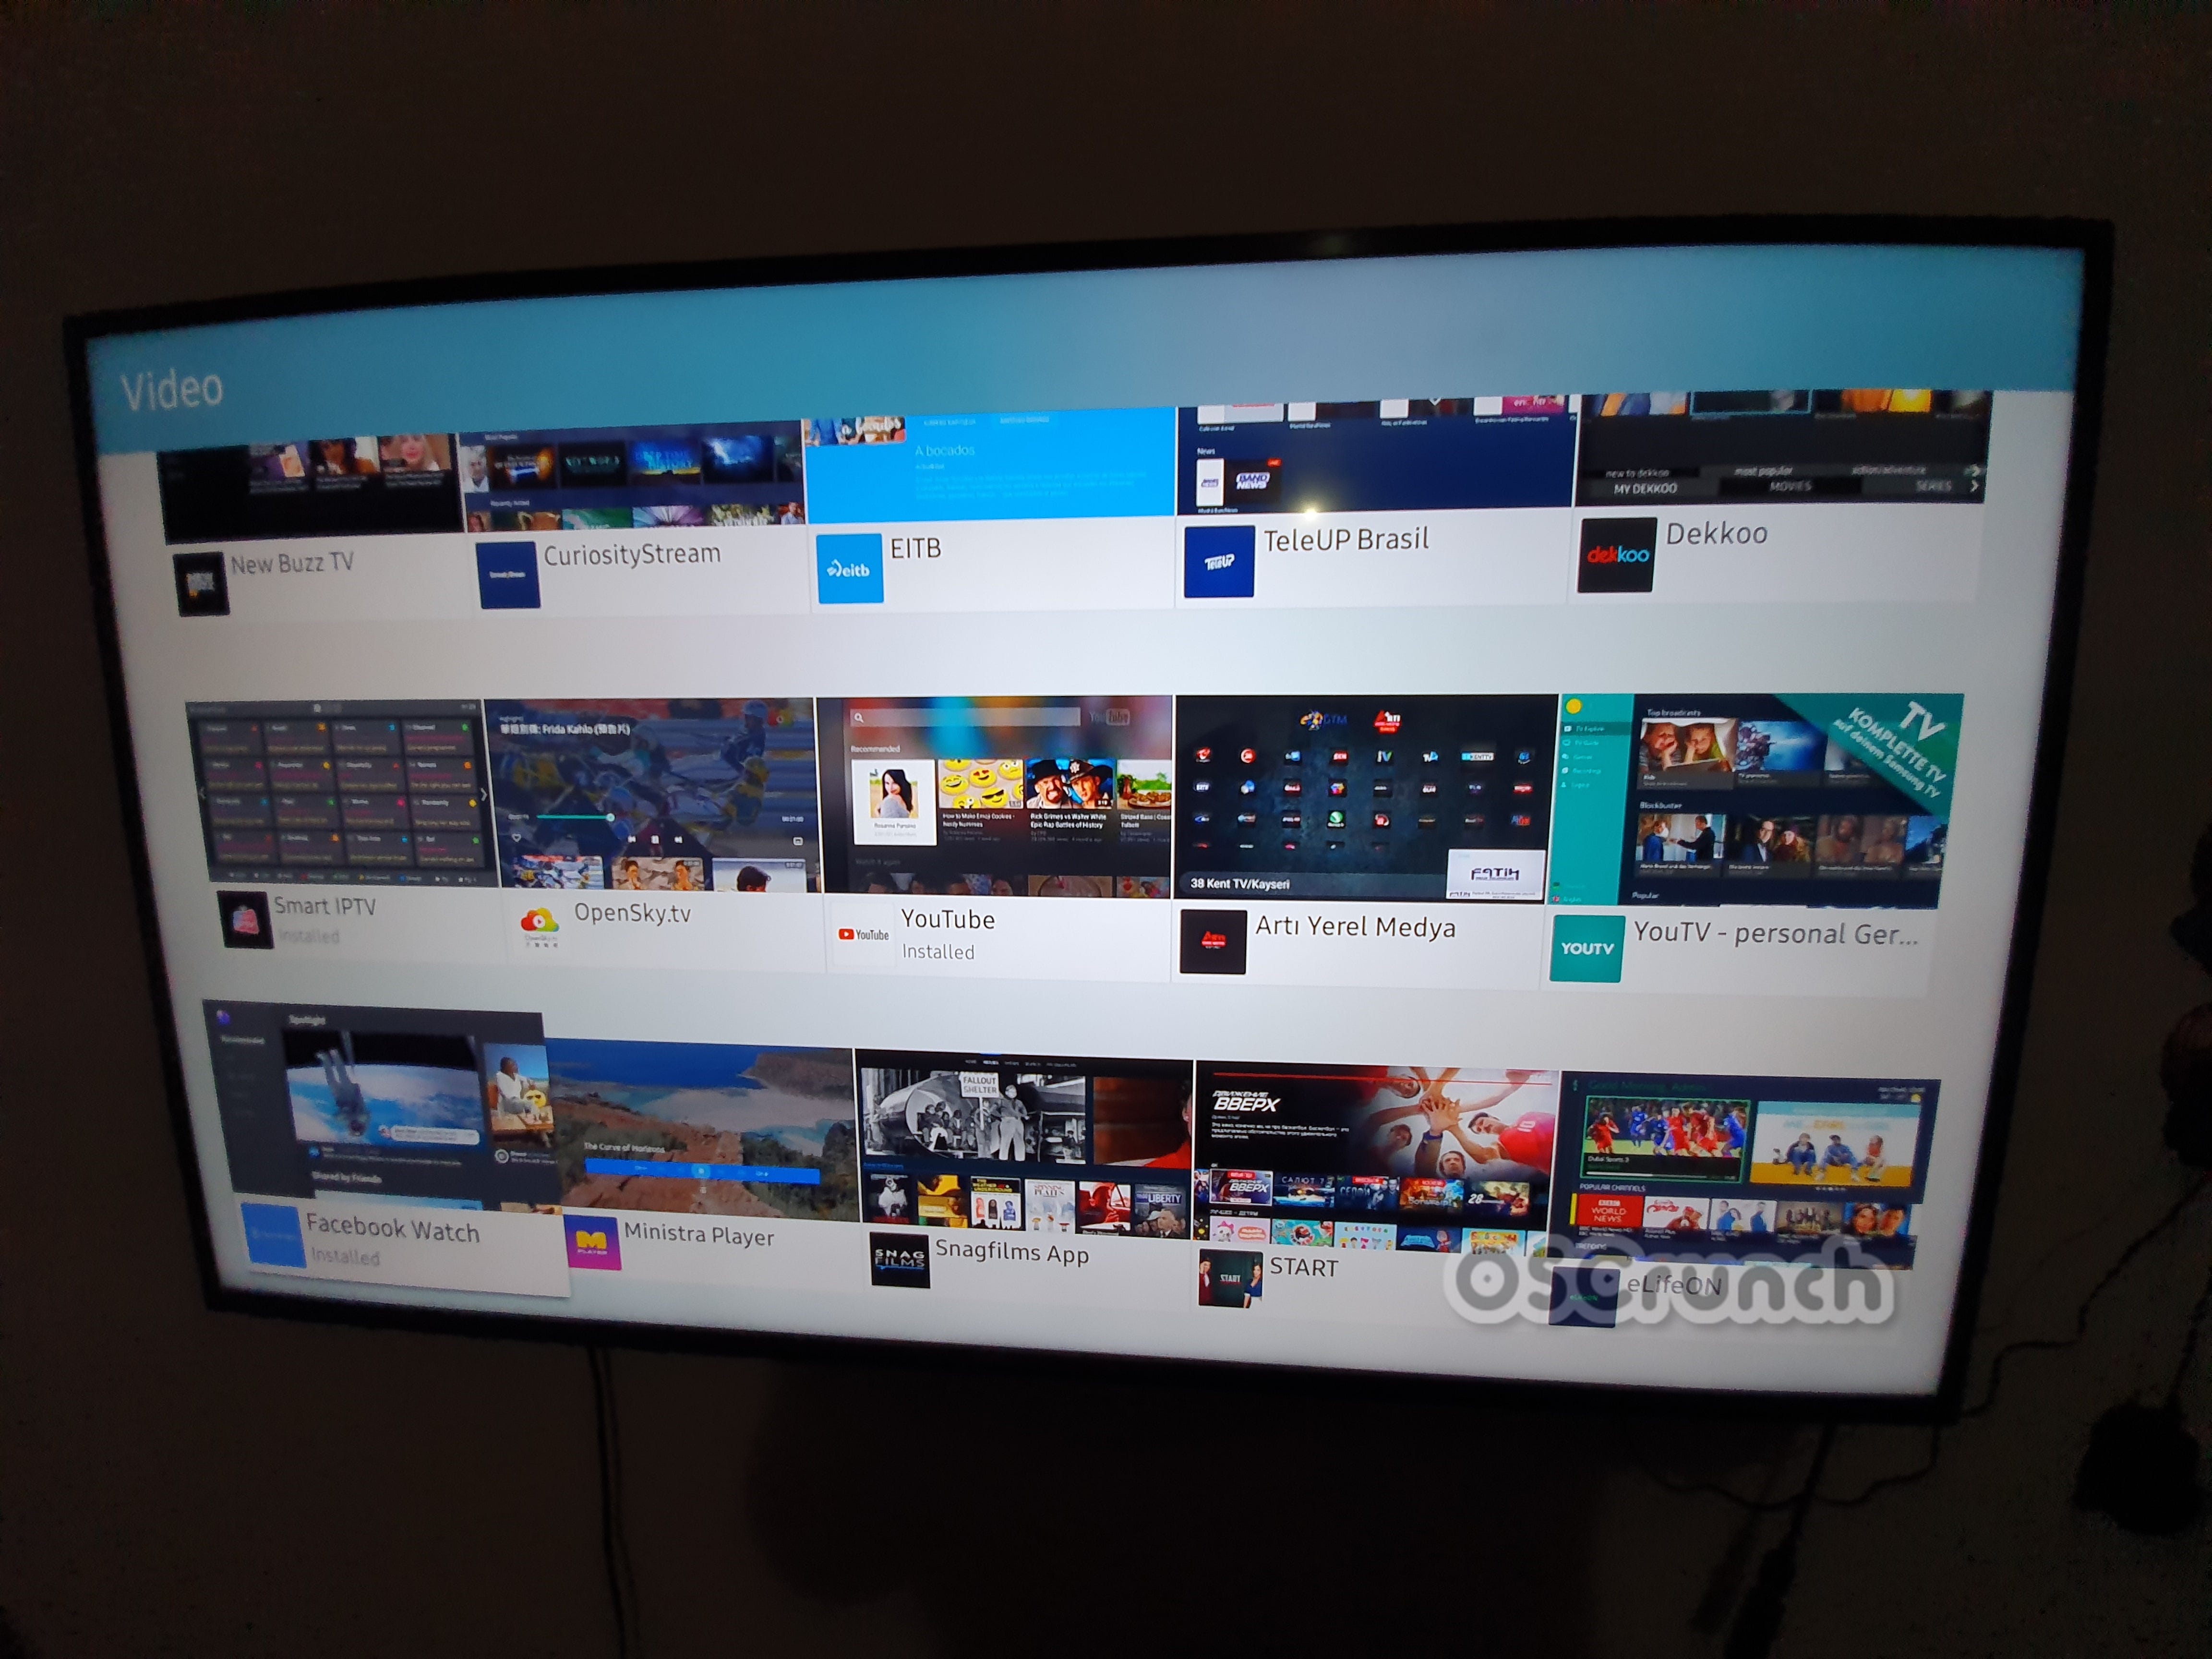 Free Pluto Tv.com Samsung Smarthub - How To Delete Apps From Smart Hub On Your Tv Samsung Us ...